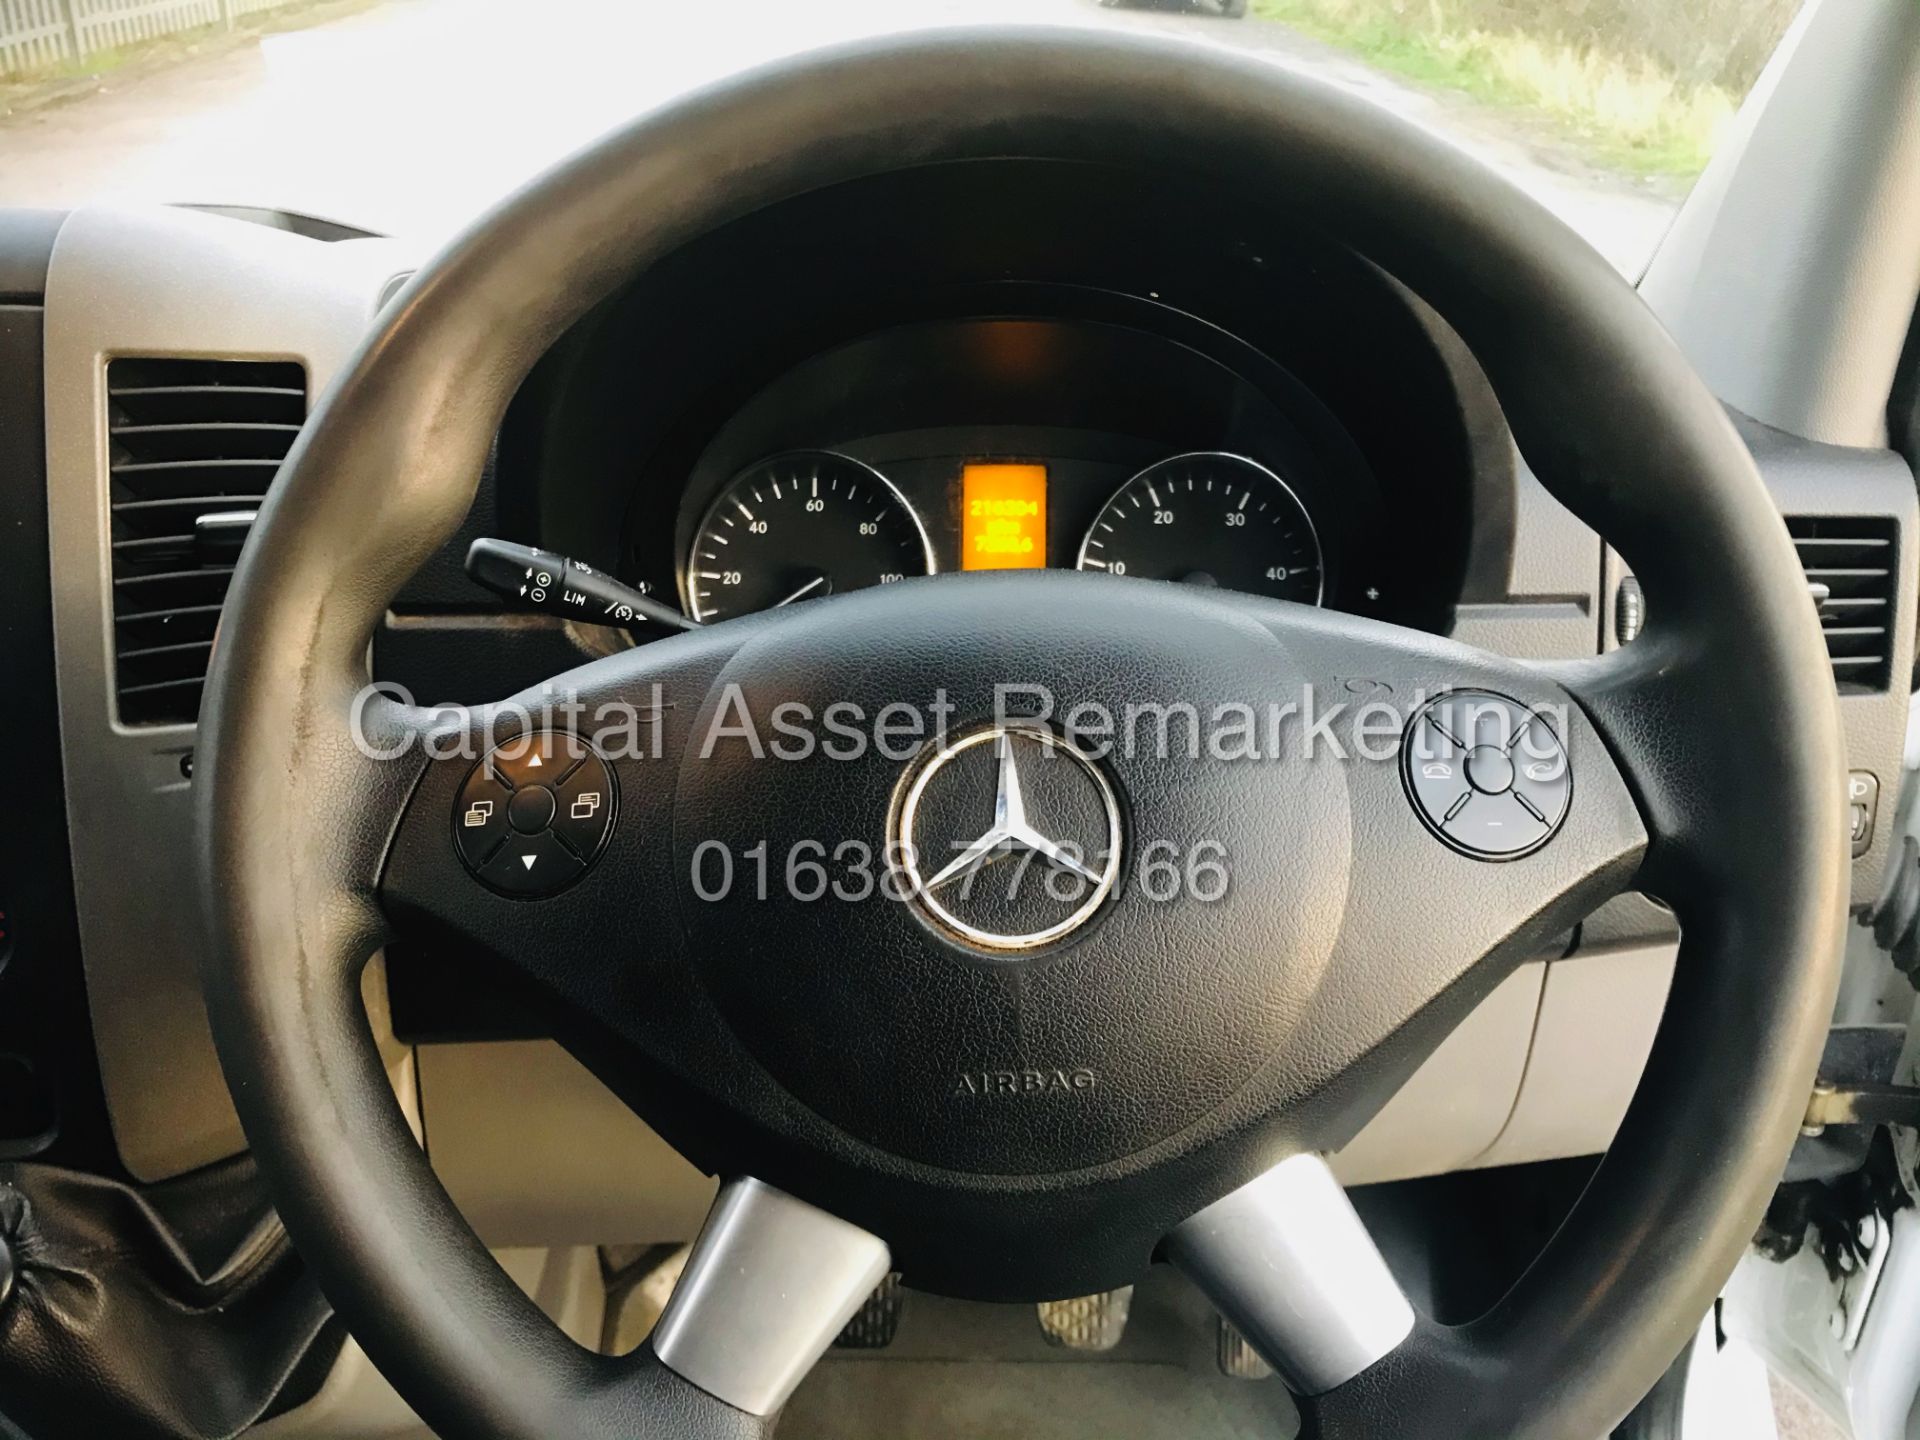 (On Sale) MERCEDES SPRINTER 513CDI "XLWB - TWIN REAR WHEELS" 1 OWNER (2015) *IDEAL CONVERSION* - Image 13 of 15